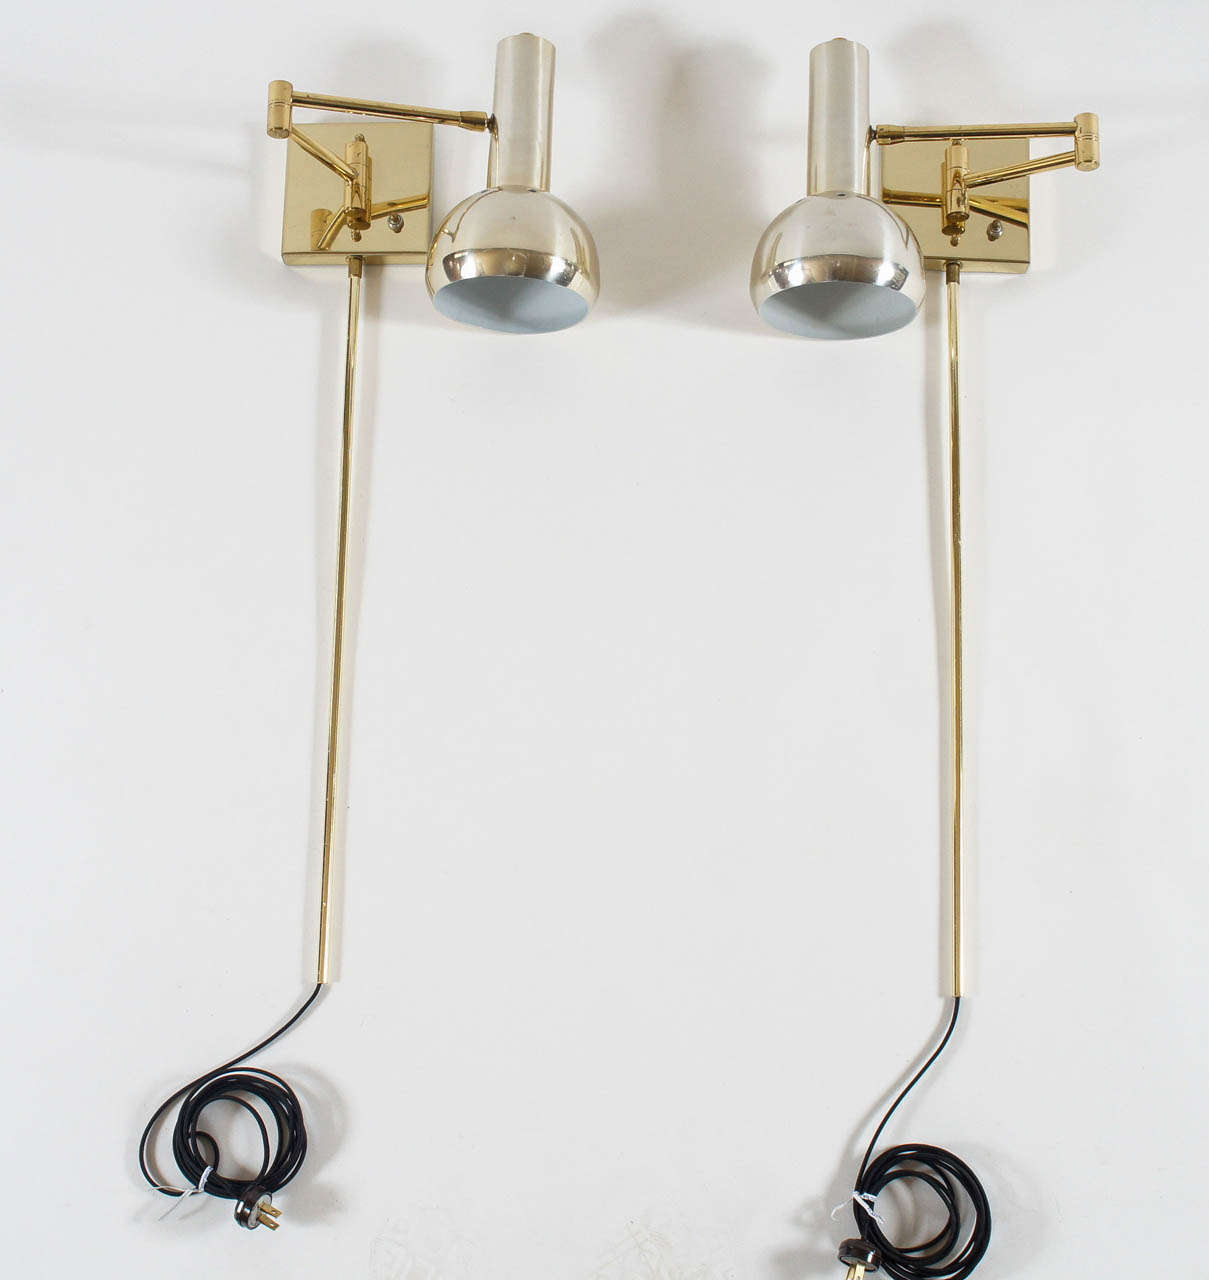 Chic vintage circa 1970 two-tone brass swing-arm wall mount reading lamps with shades having white enameled interiors and circular perforations at top.  Rewired for North American use.  Shades measure 10